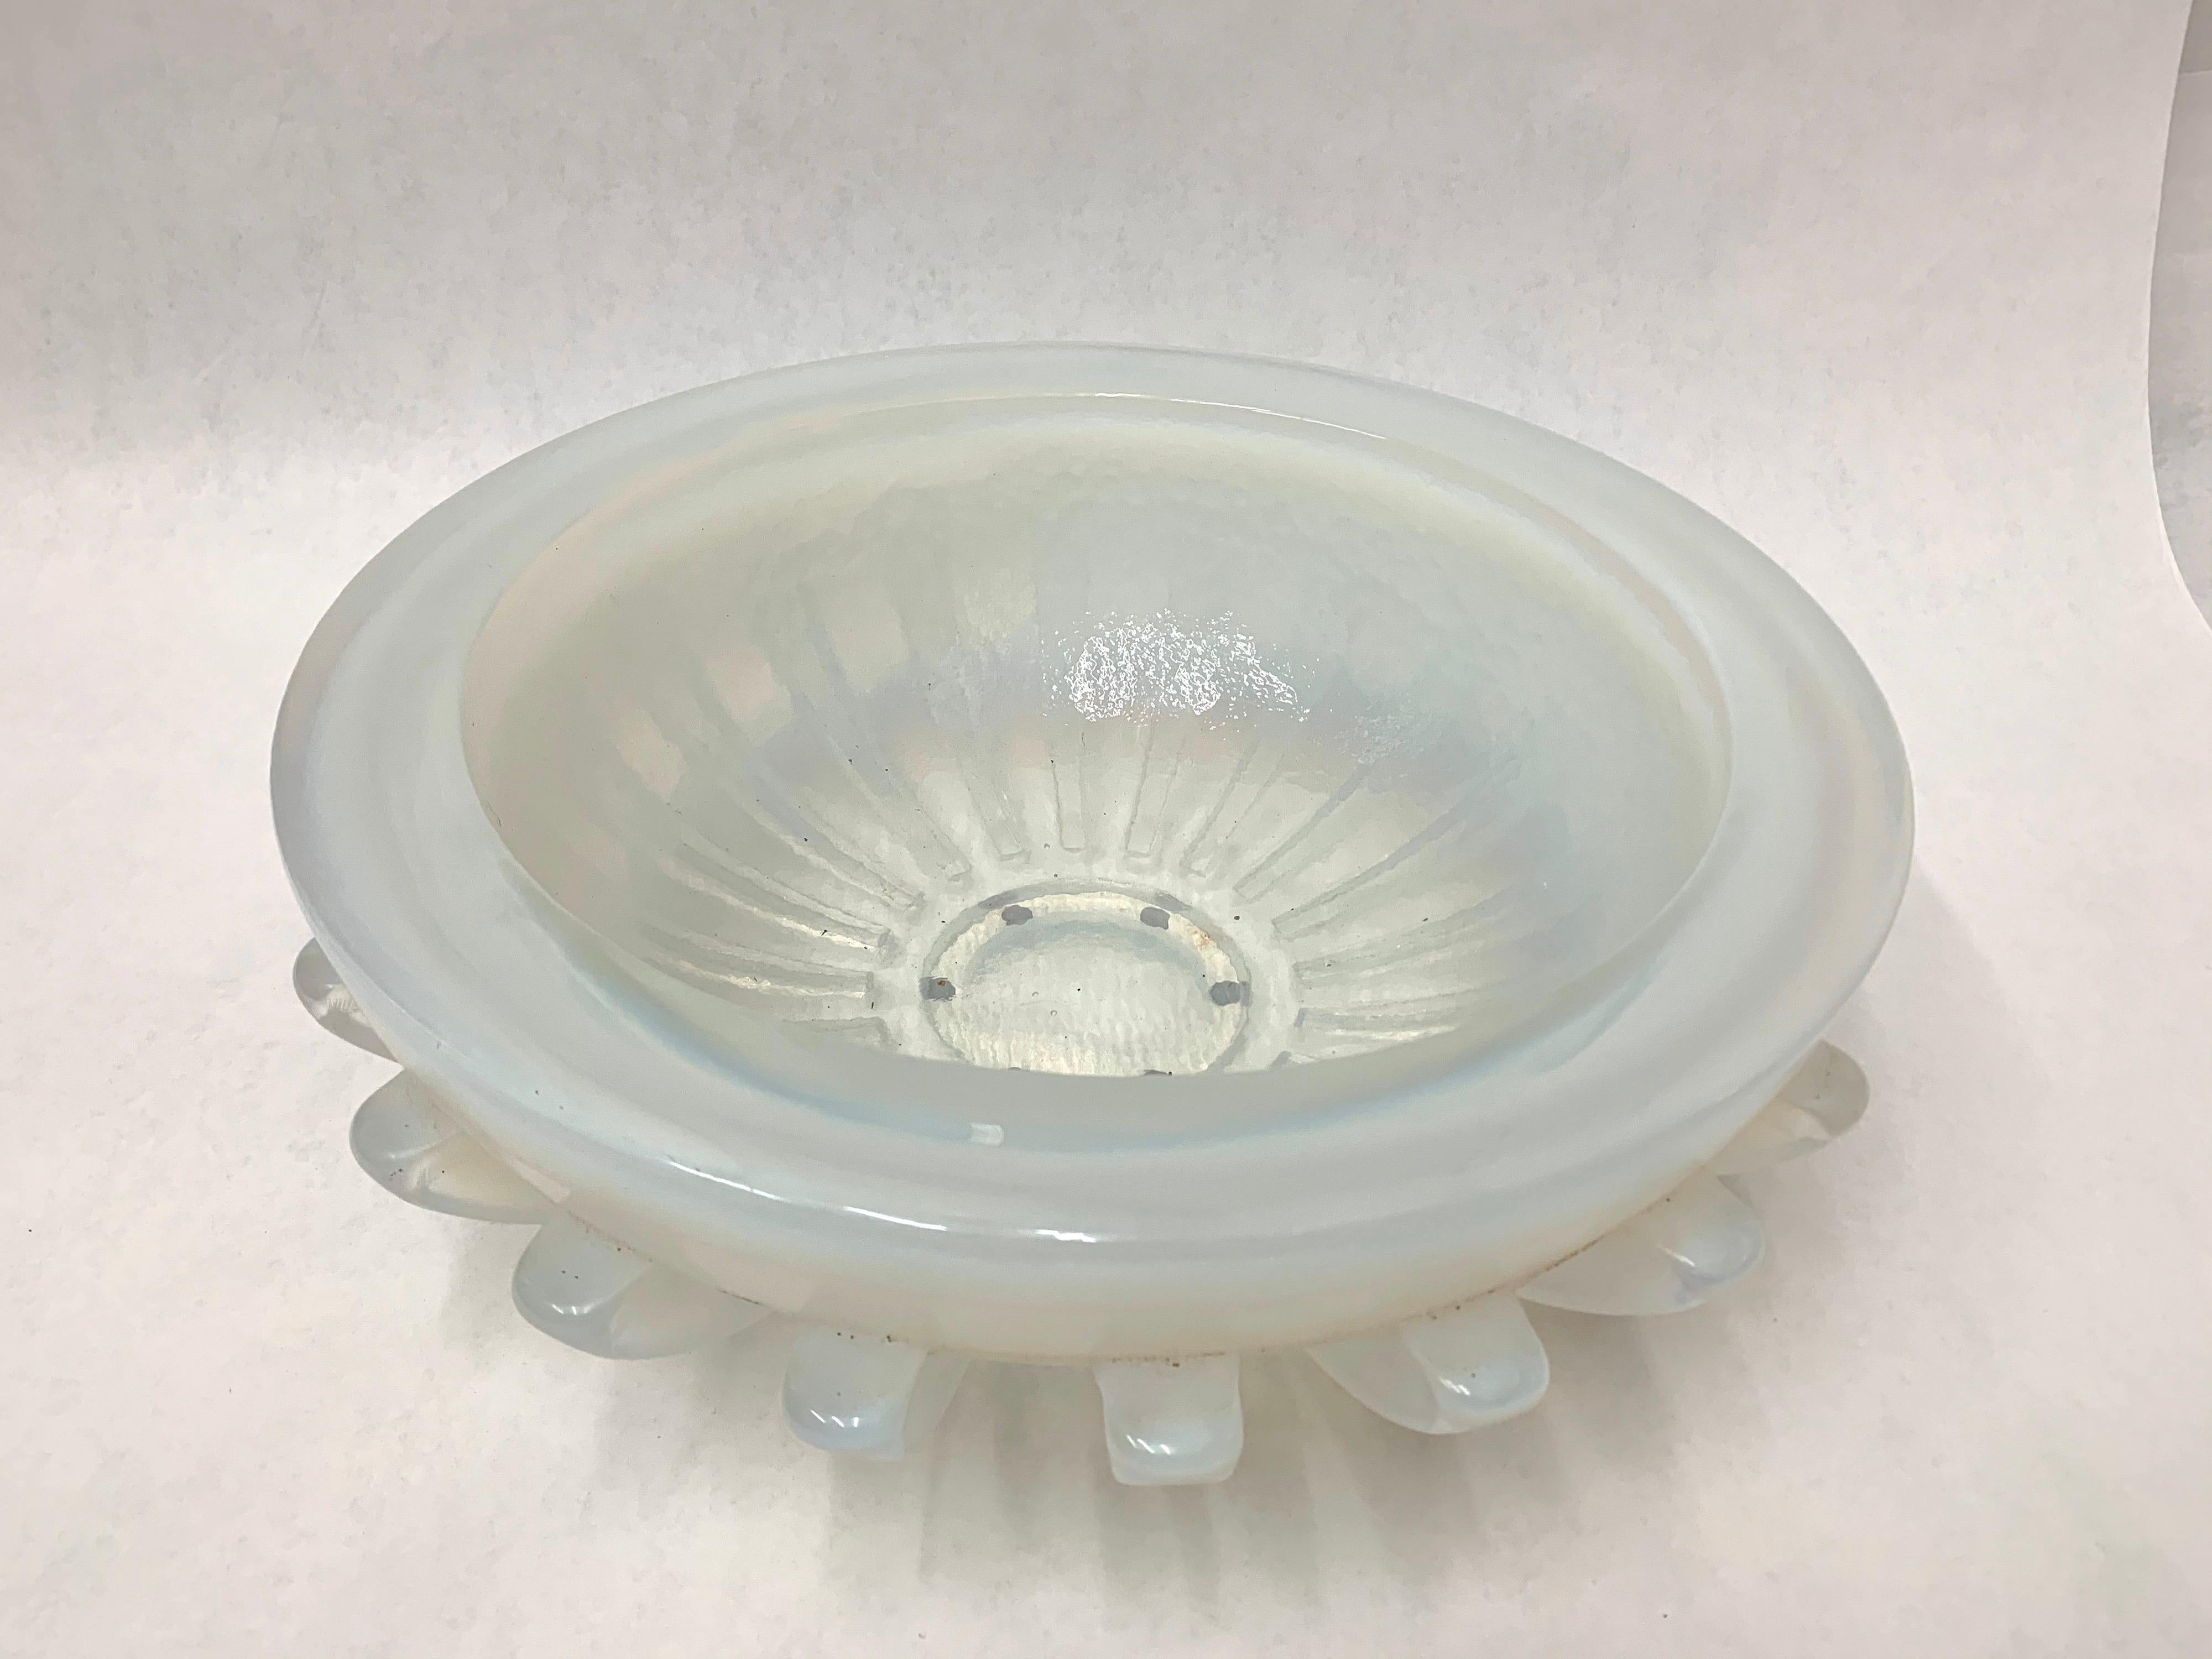 Italian Massive Iridescent Opaline Murano Glass Bowl with Buttress Accents